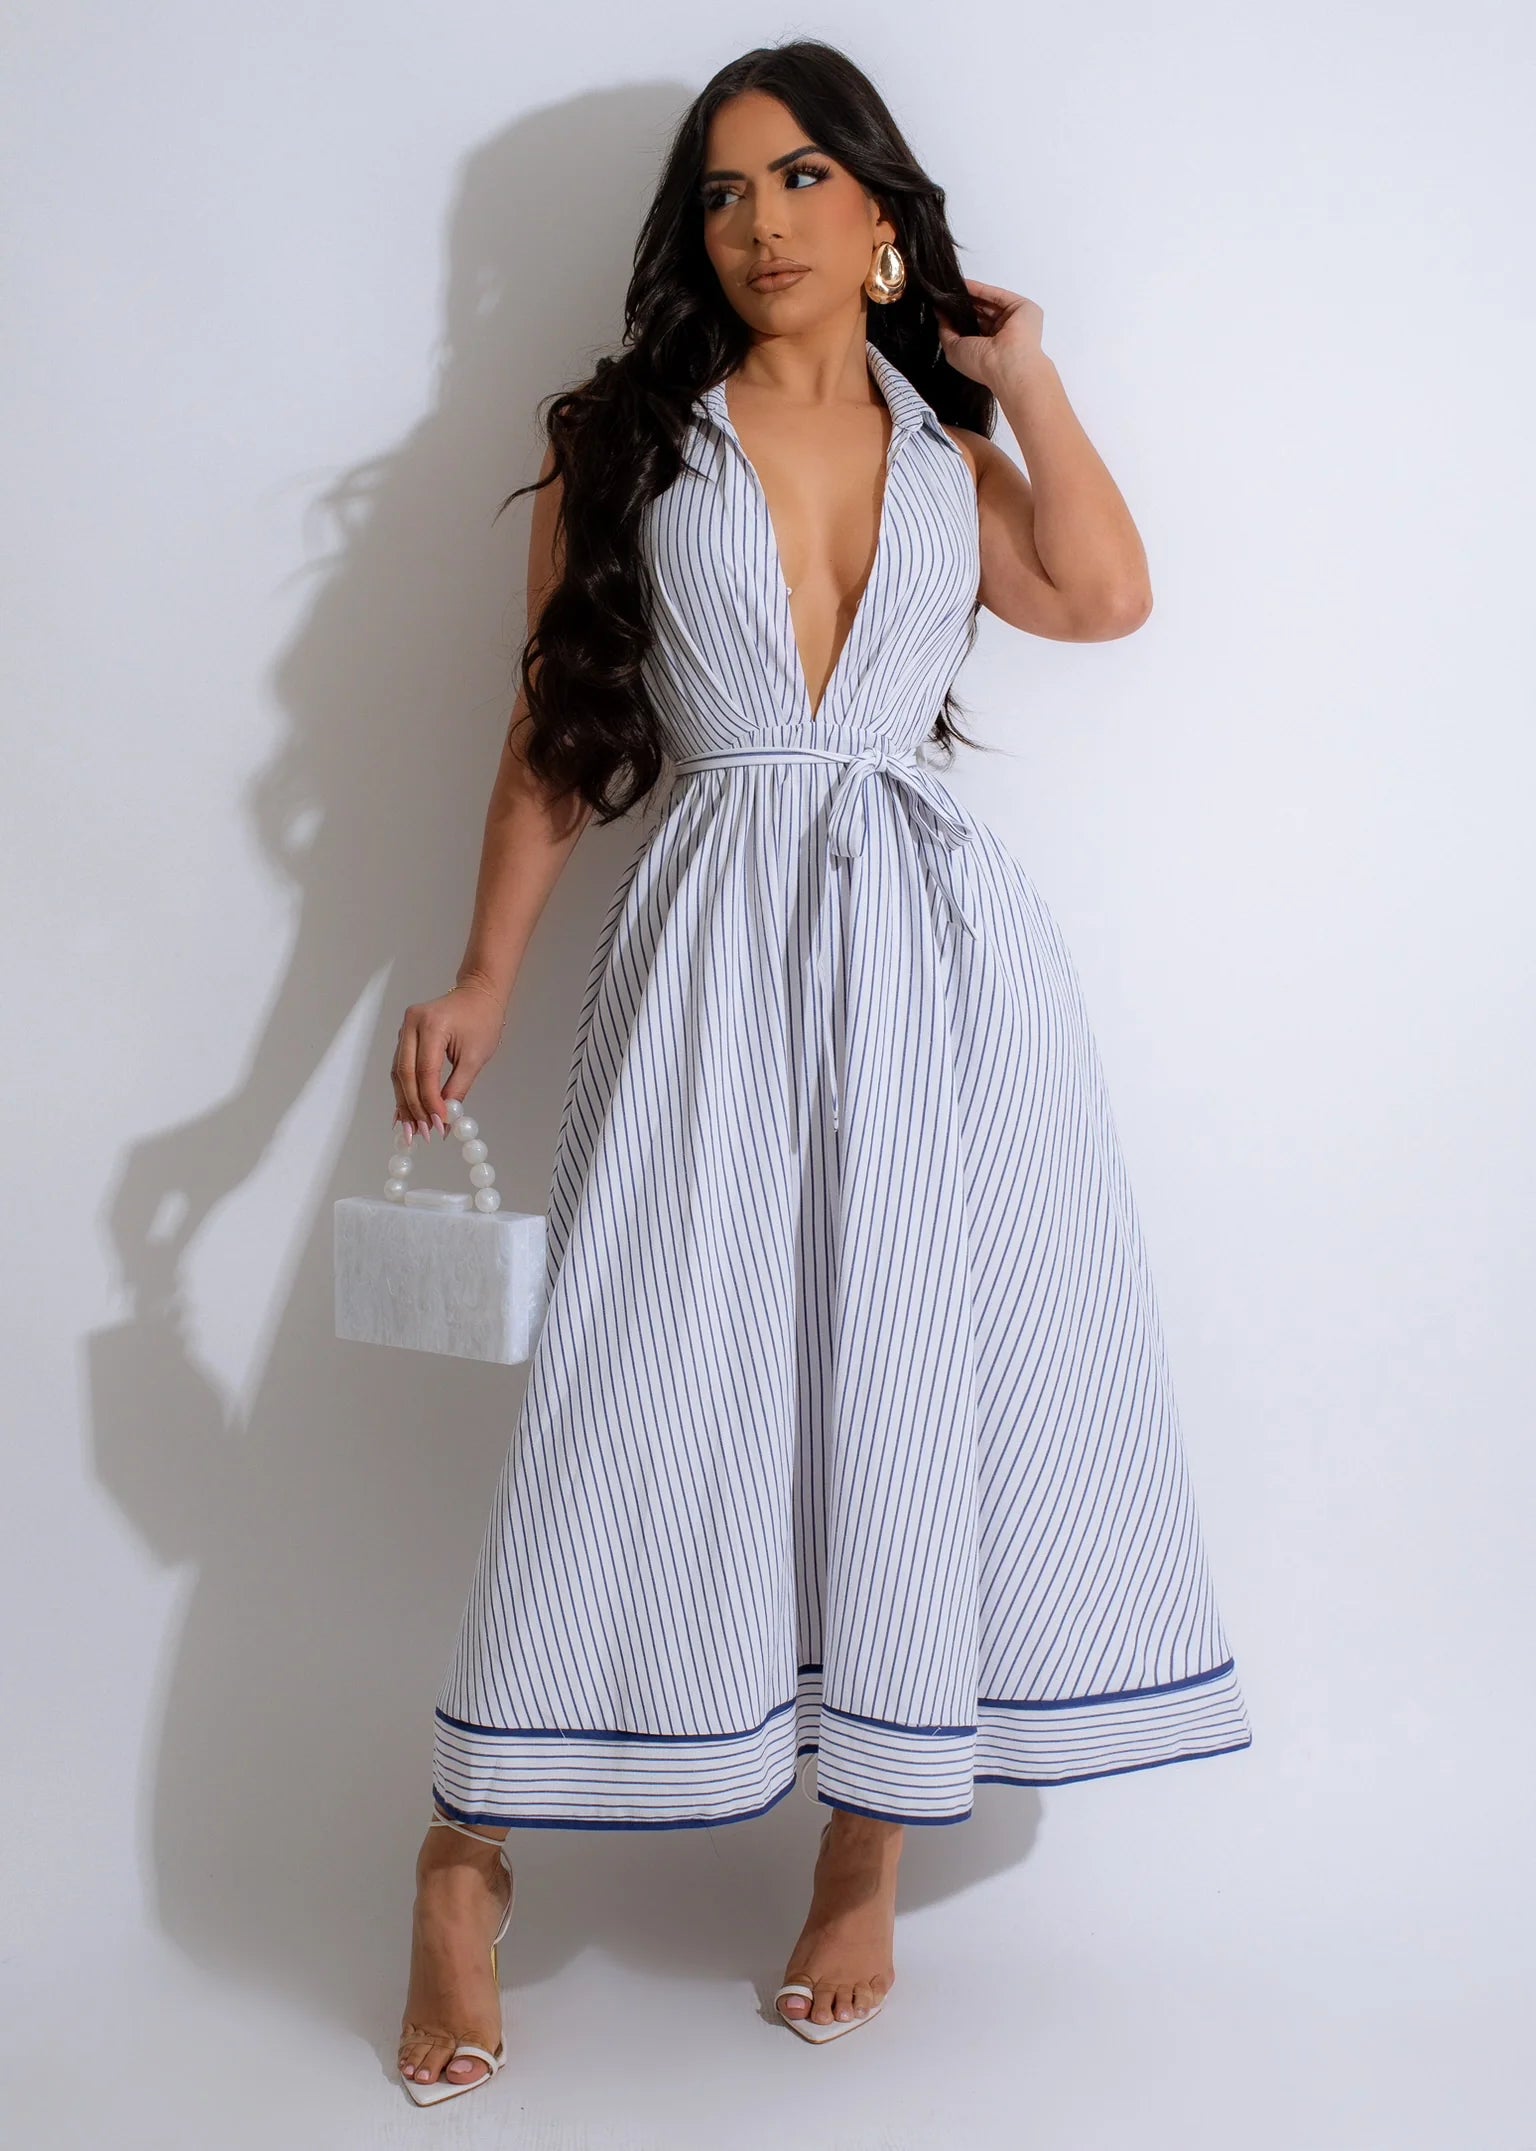 Pinstripe Millionaire Bae Midi Dress BlueSimplyDerri

Elevate your style with elegance through our Pinstripe Millionaire Bae Midi Dress, a sophisticated garment that adds a modern touch to a classic design. This refinDressPinstripe Millionaire Bae Midi Dress Blue